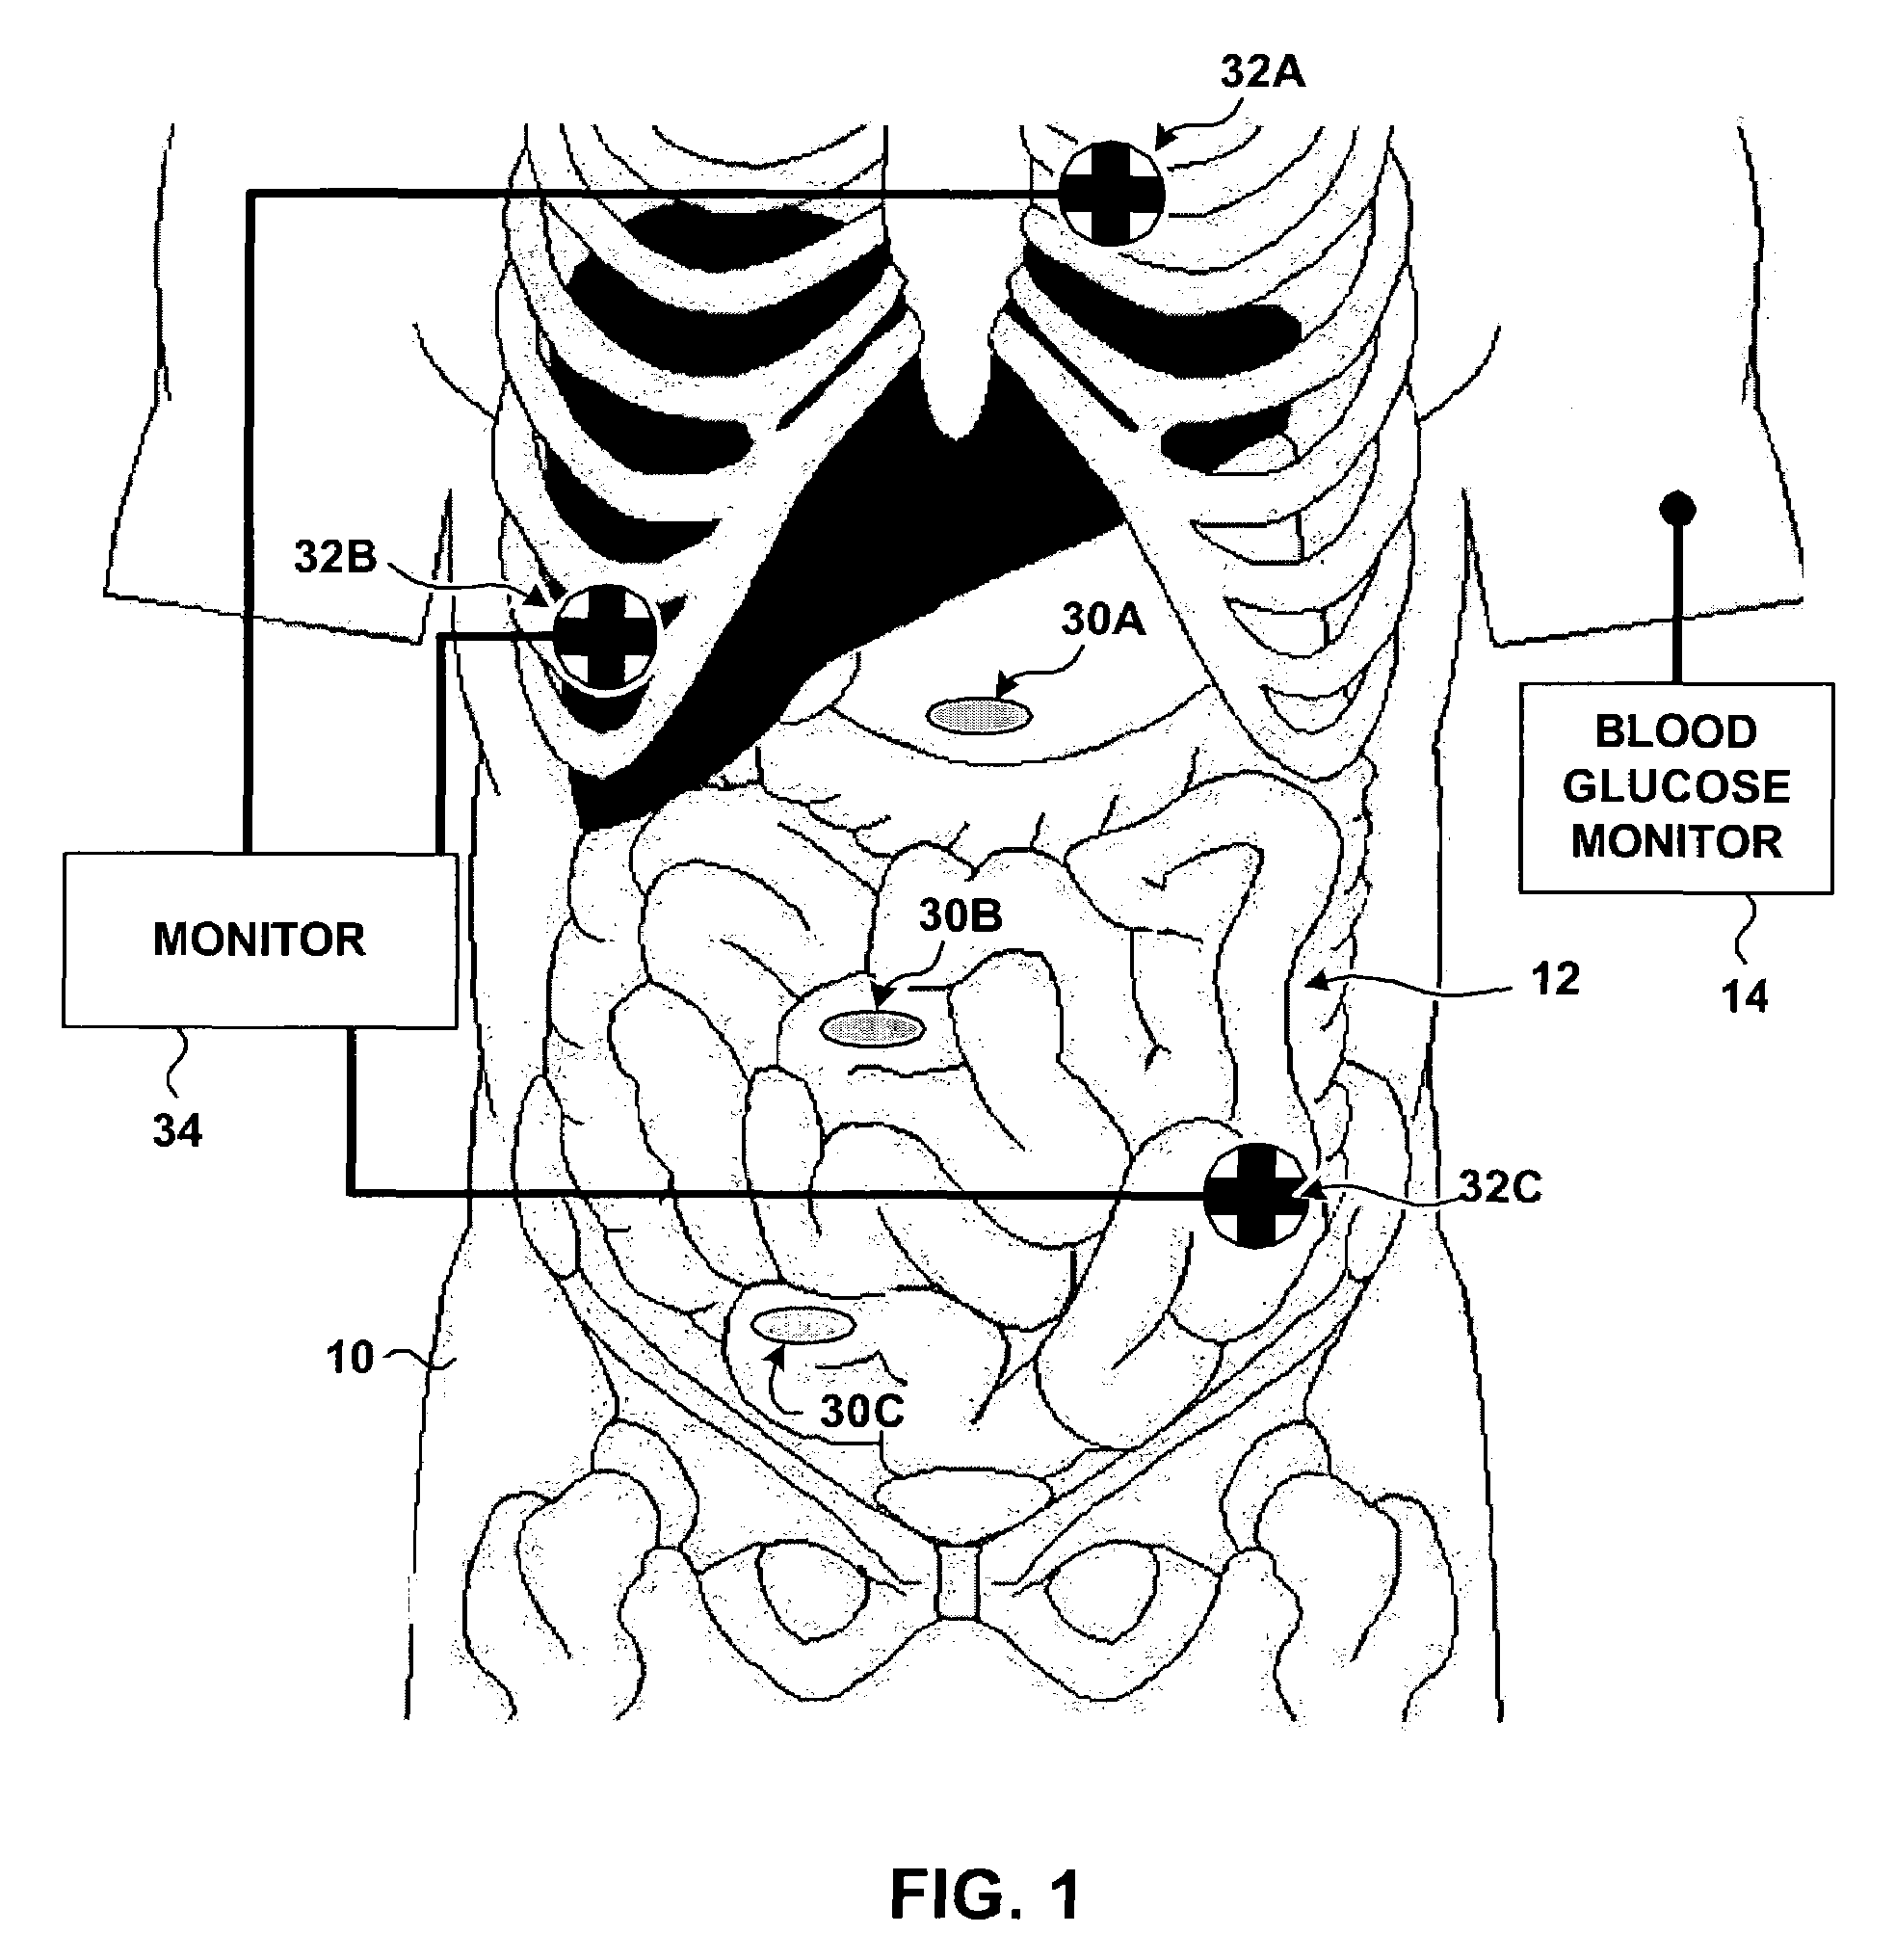 Systems and methods for monitoring gastrointestinal system